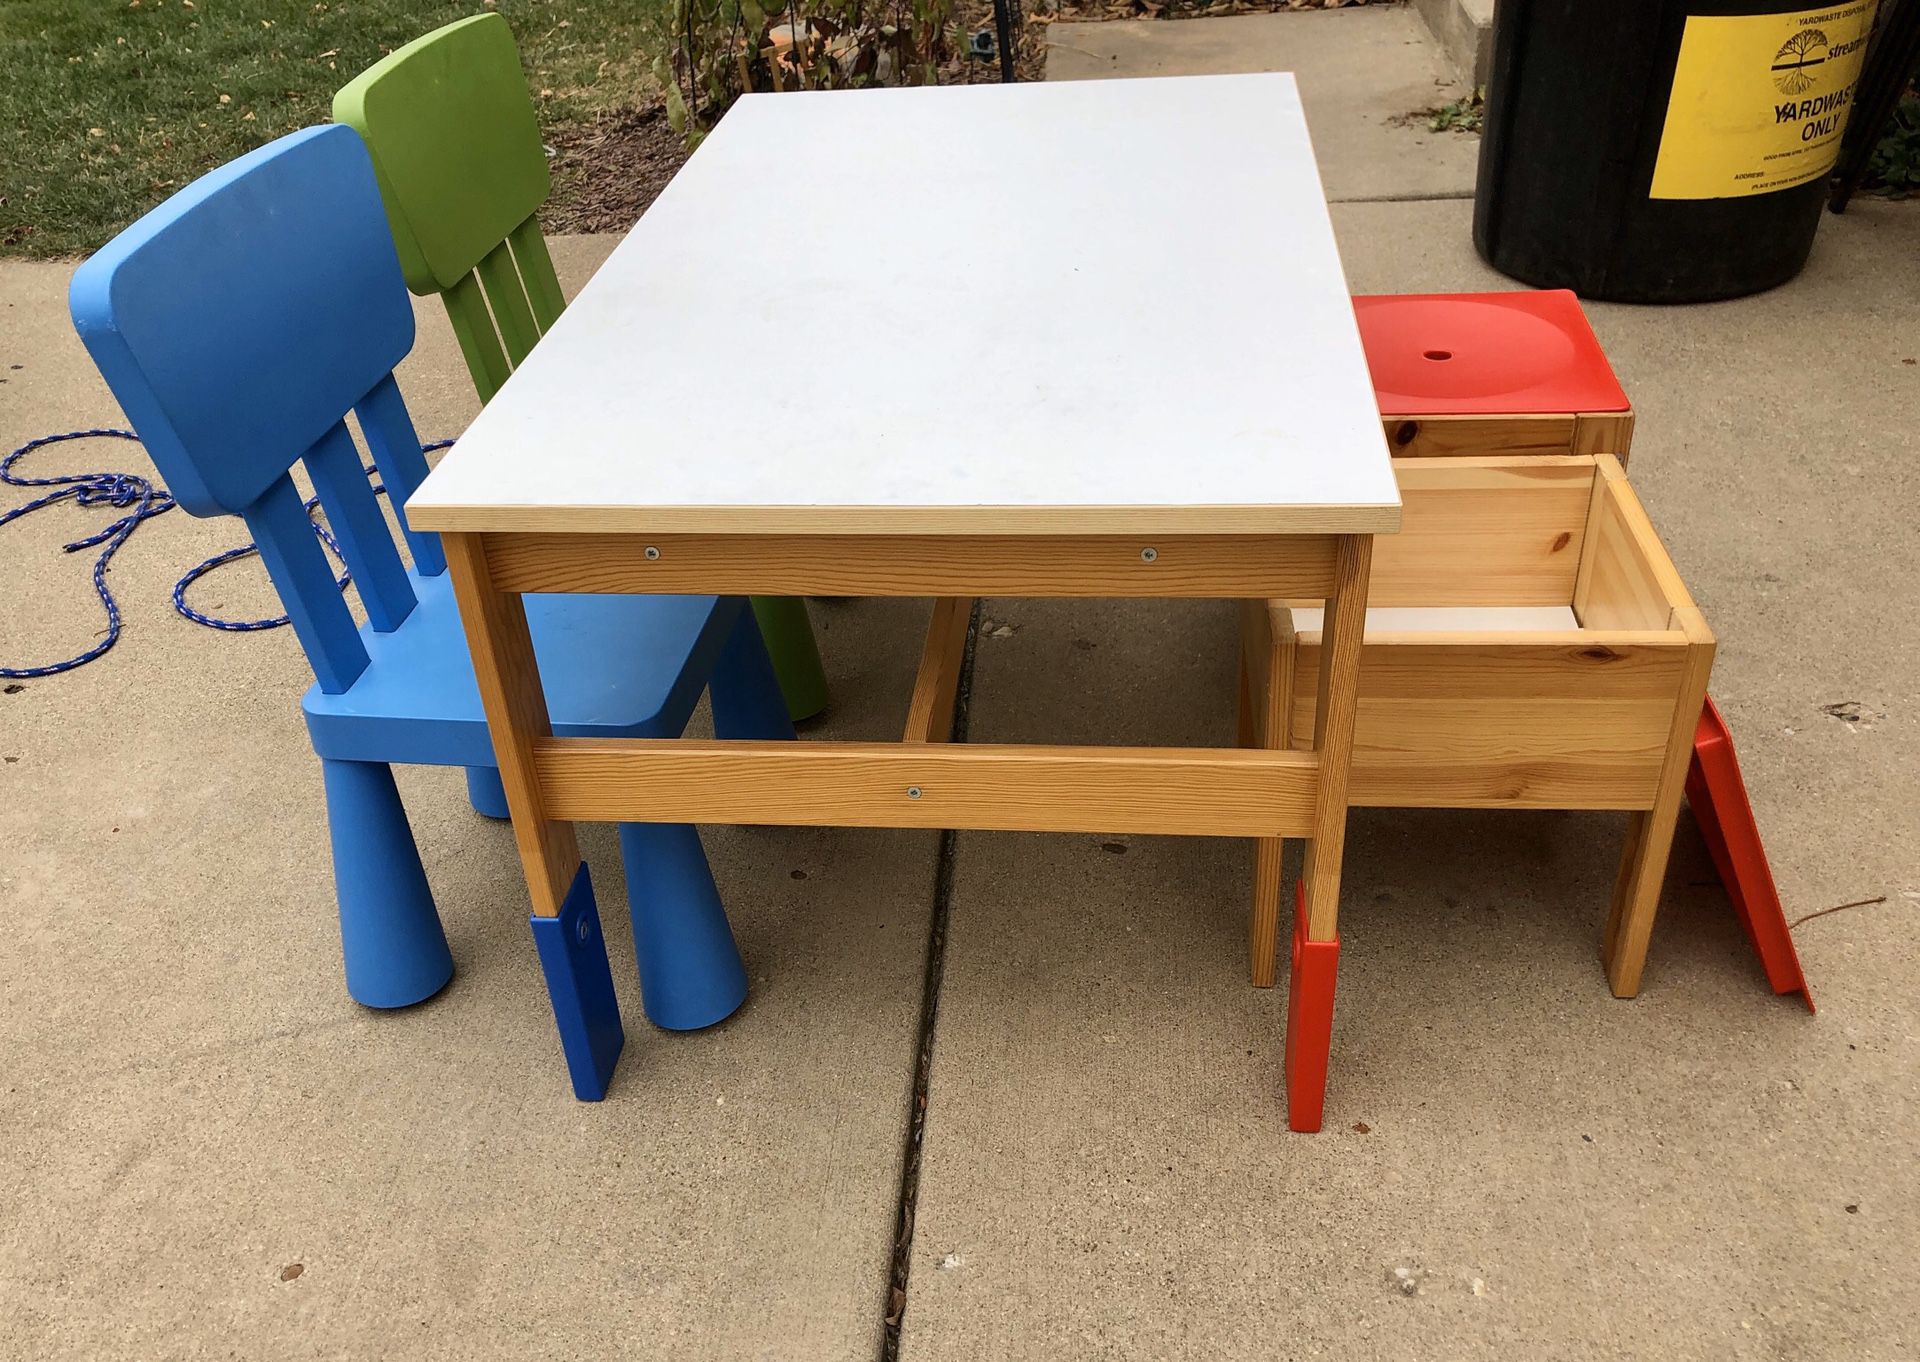 Youth arts and crafts table